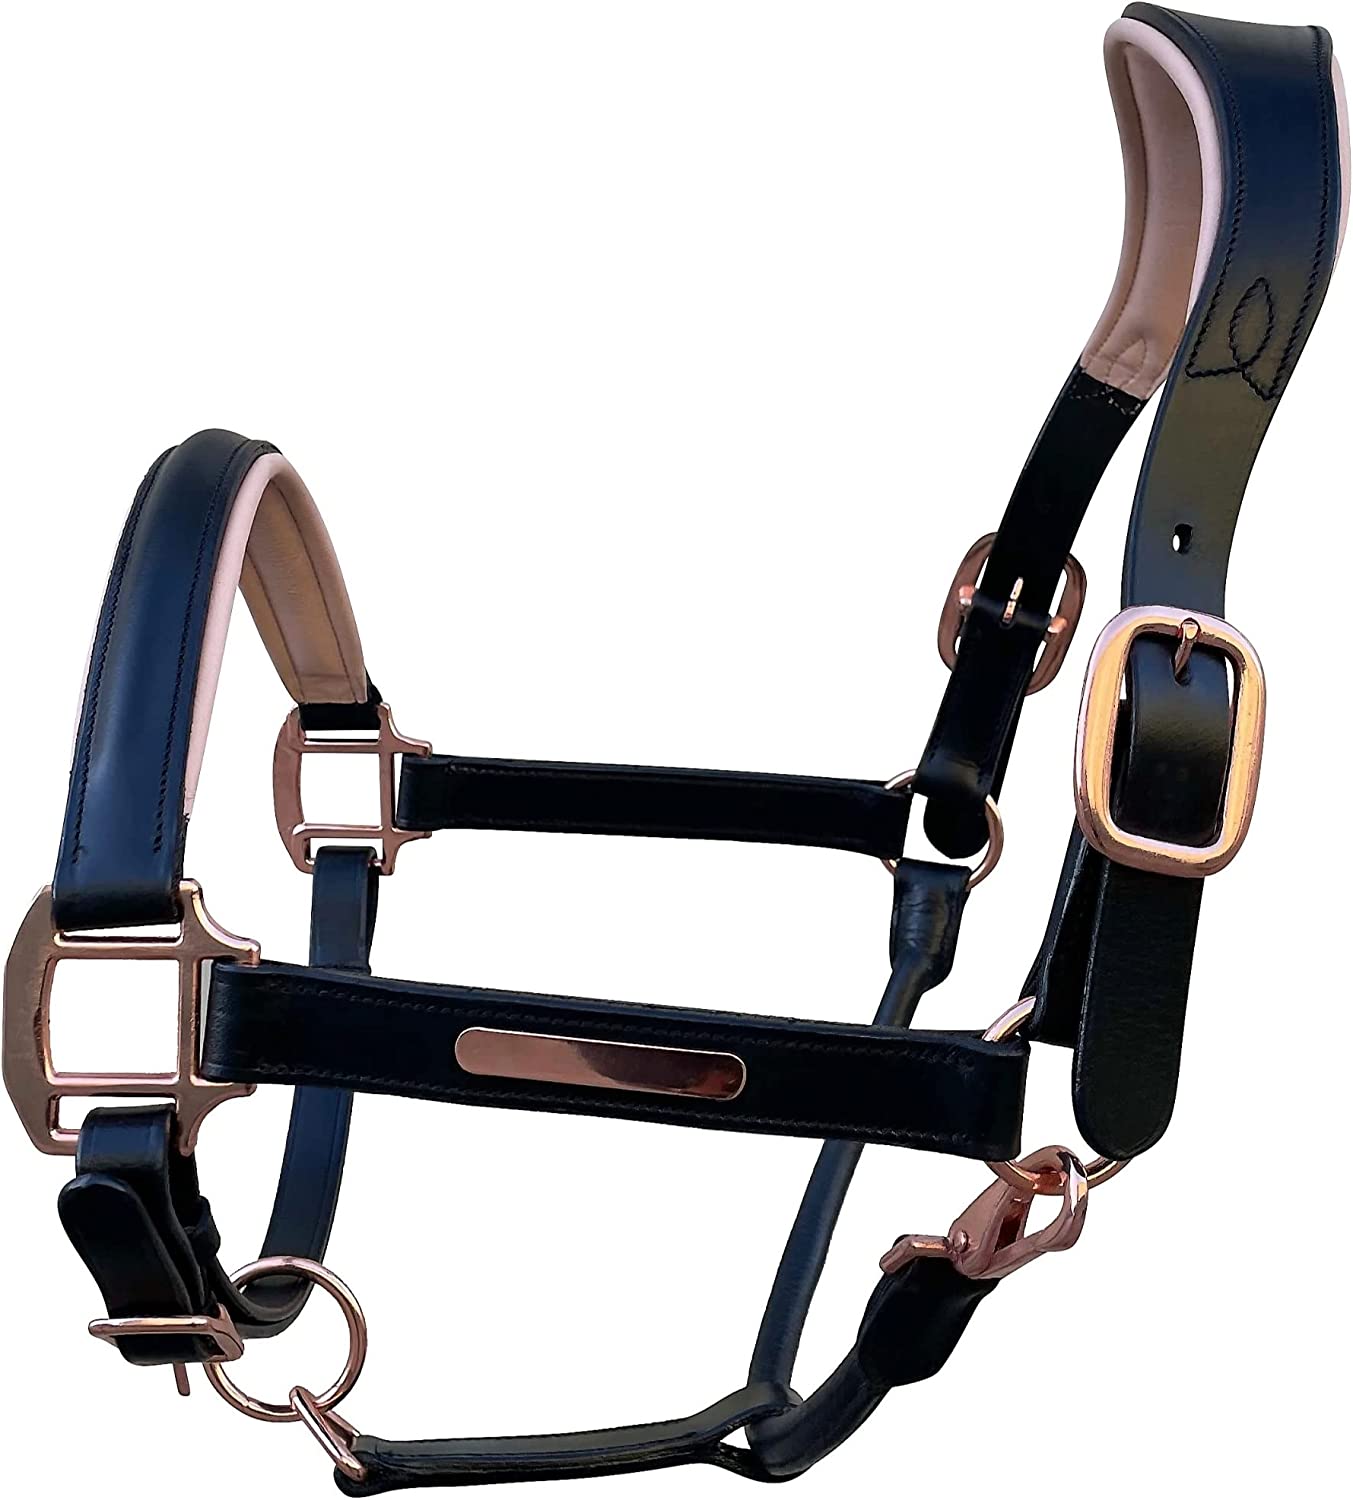 Hollywood Leather Halter - The Dressage Pony Store